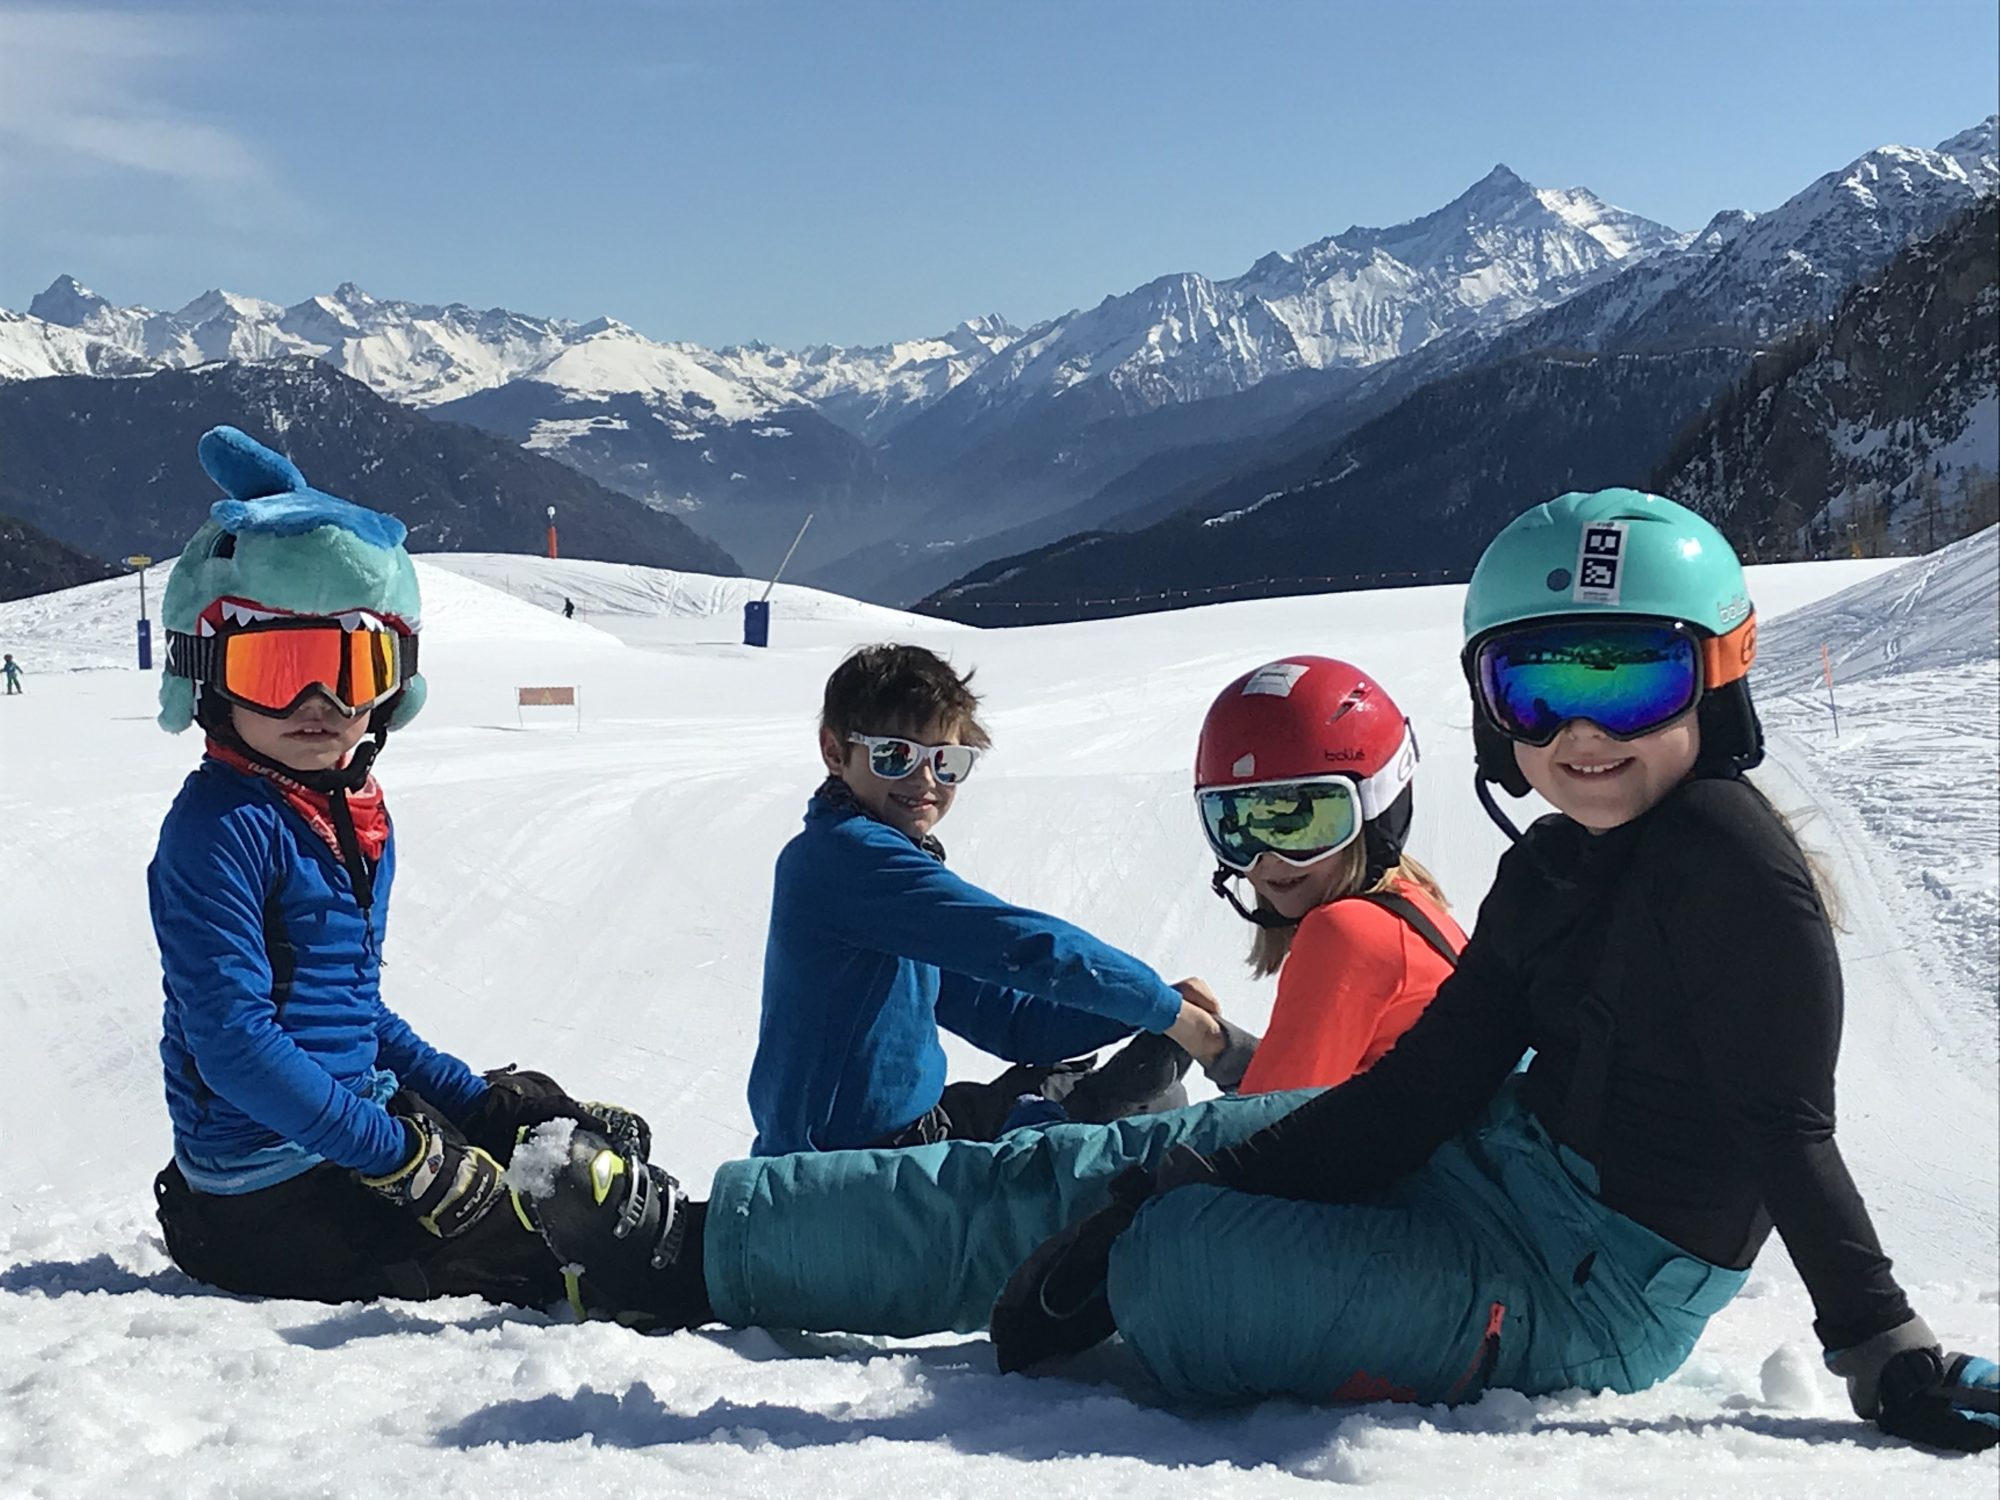 The kids at Maison Vielle- enjoying the day in the sun. Photo: The-Ski-Guru. The Half Term Family Ski Holiday that did not result as planned.